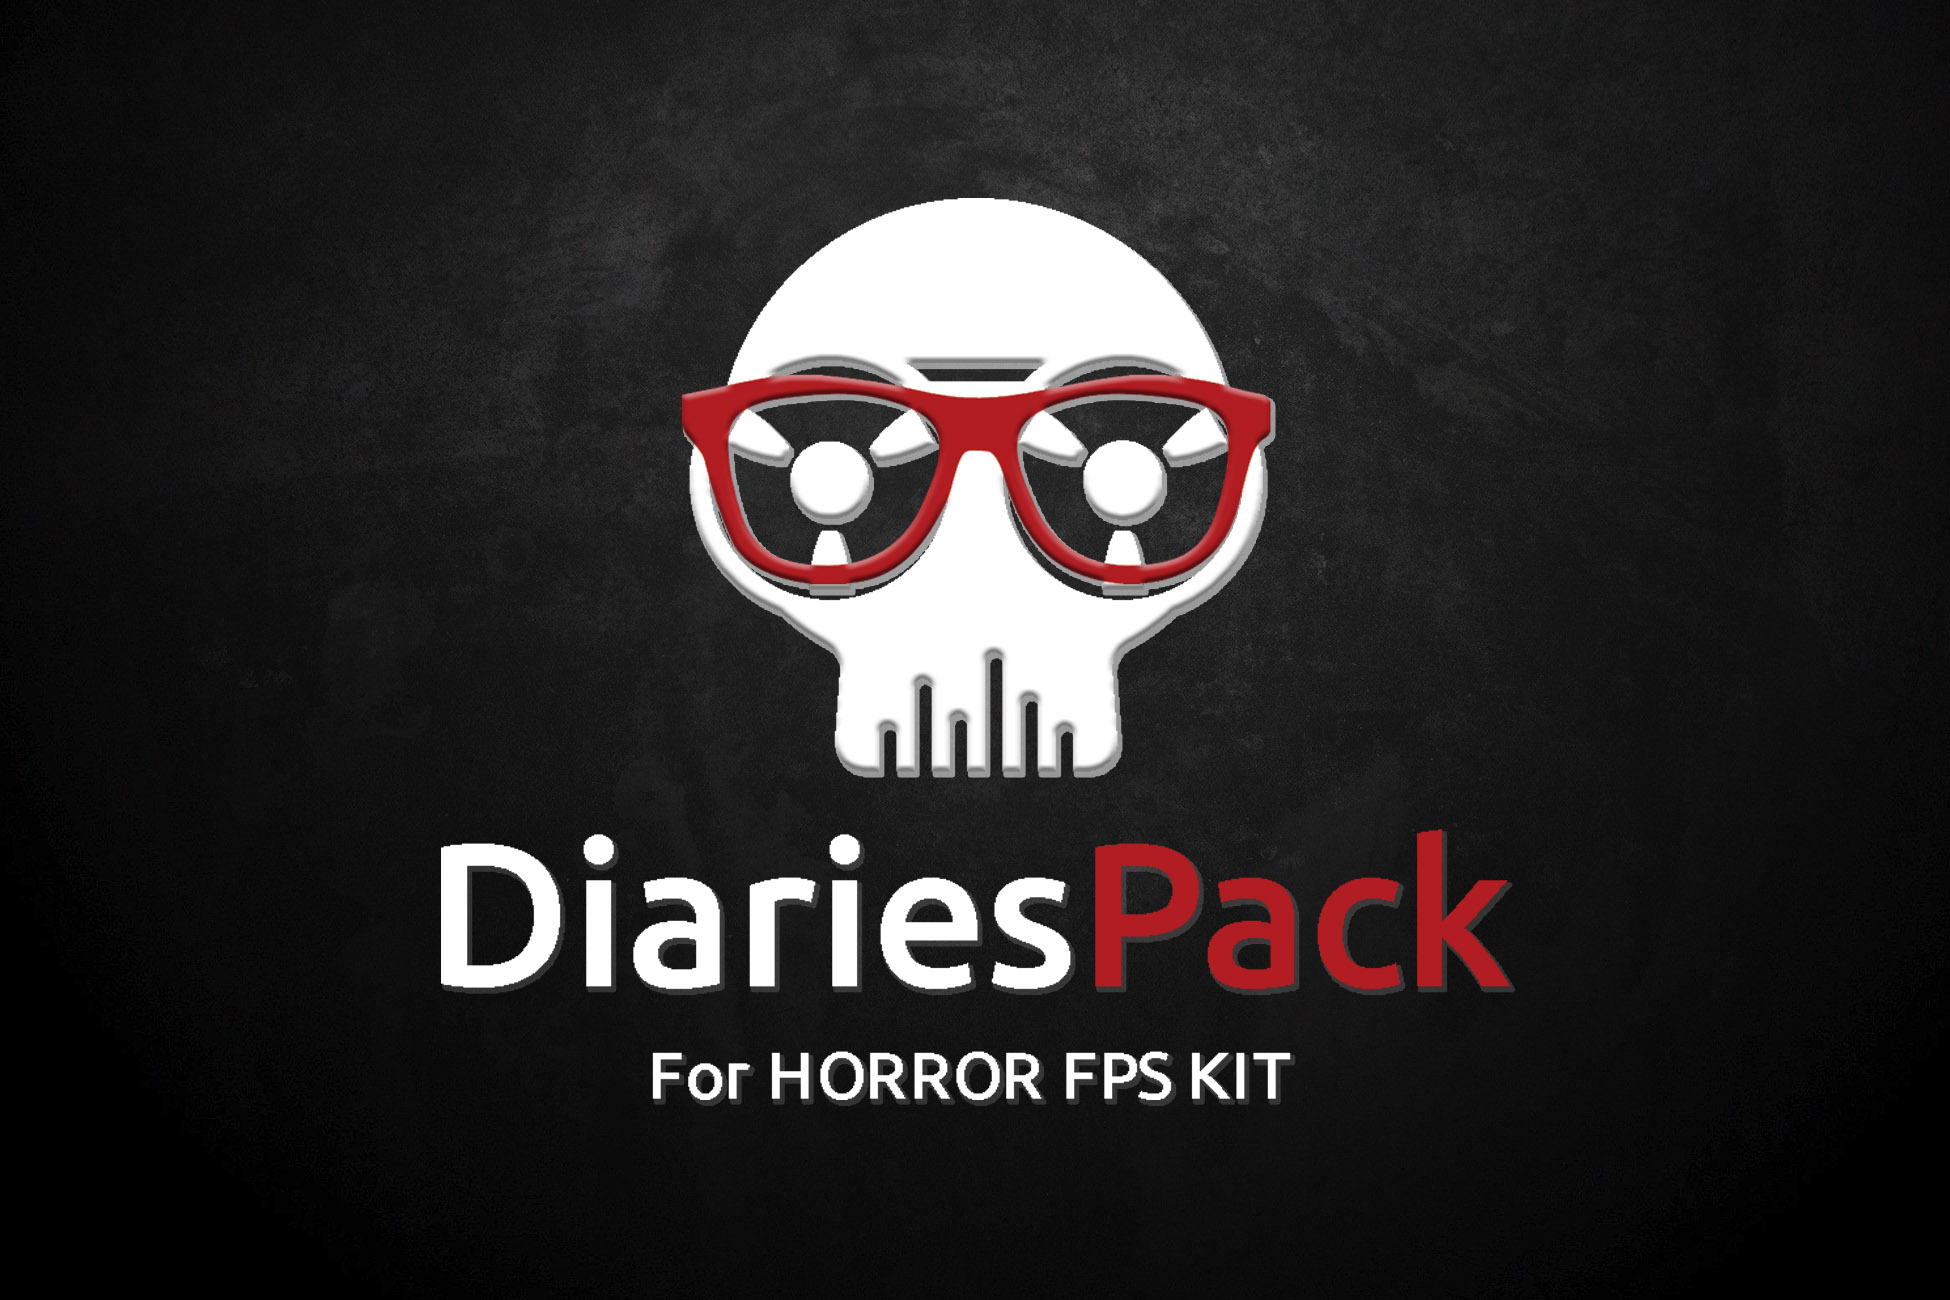 Diaries Pack v0.6.1 Release